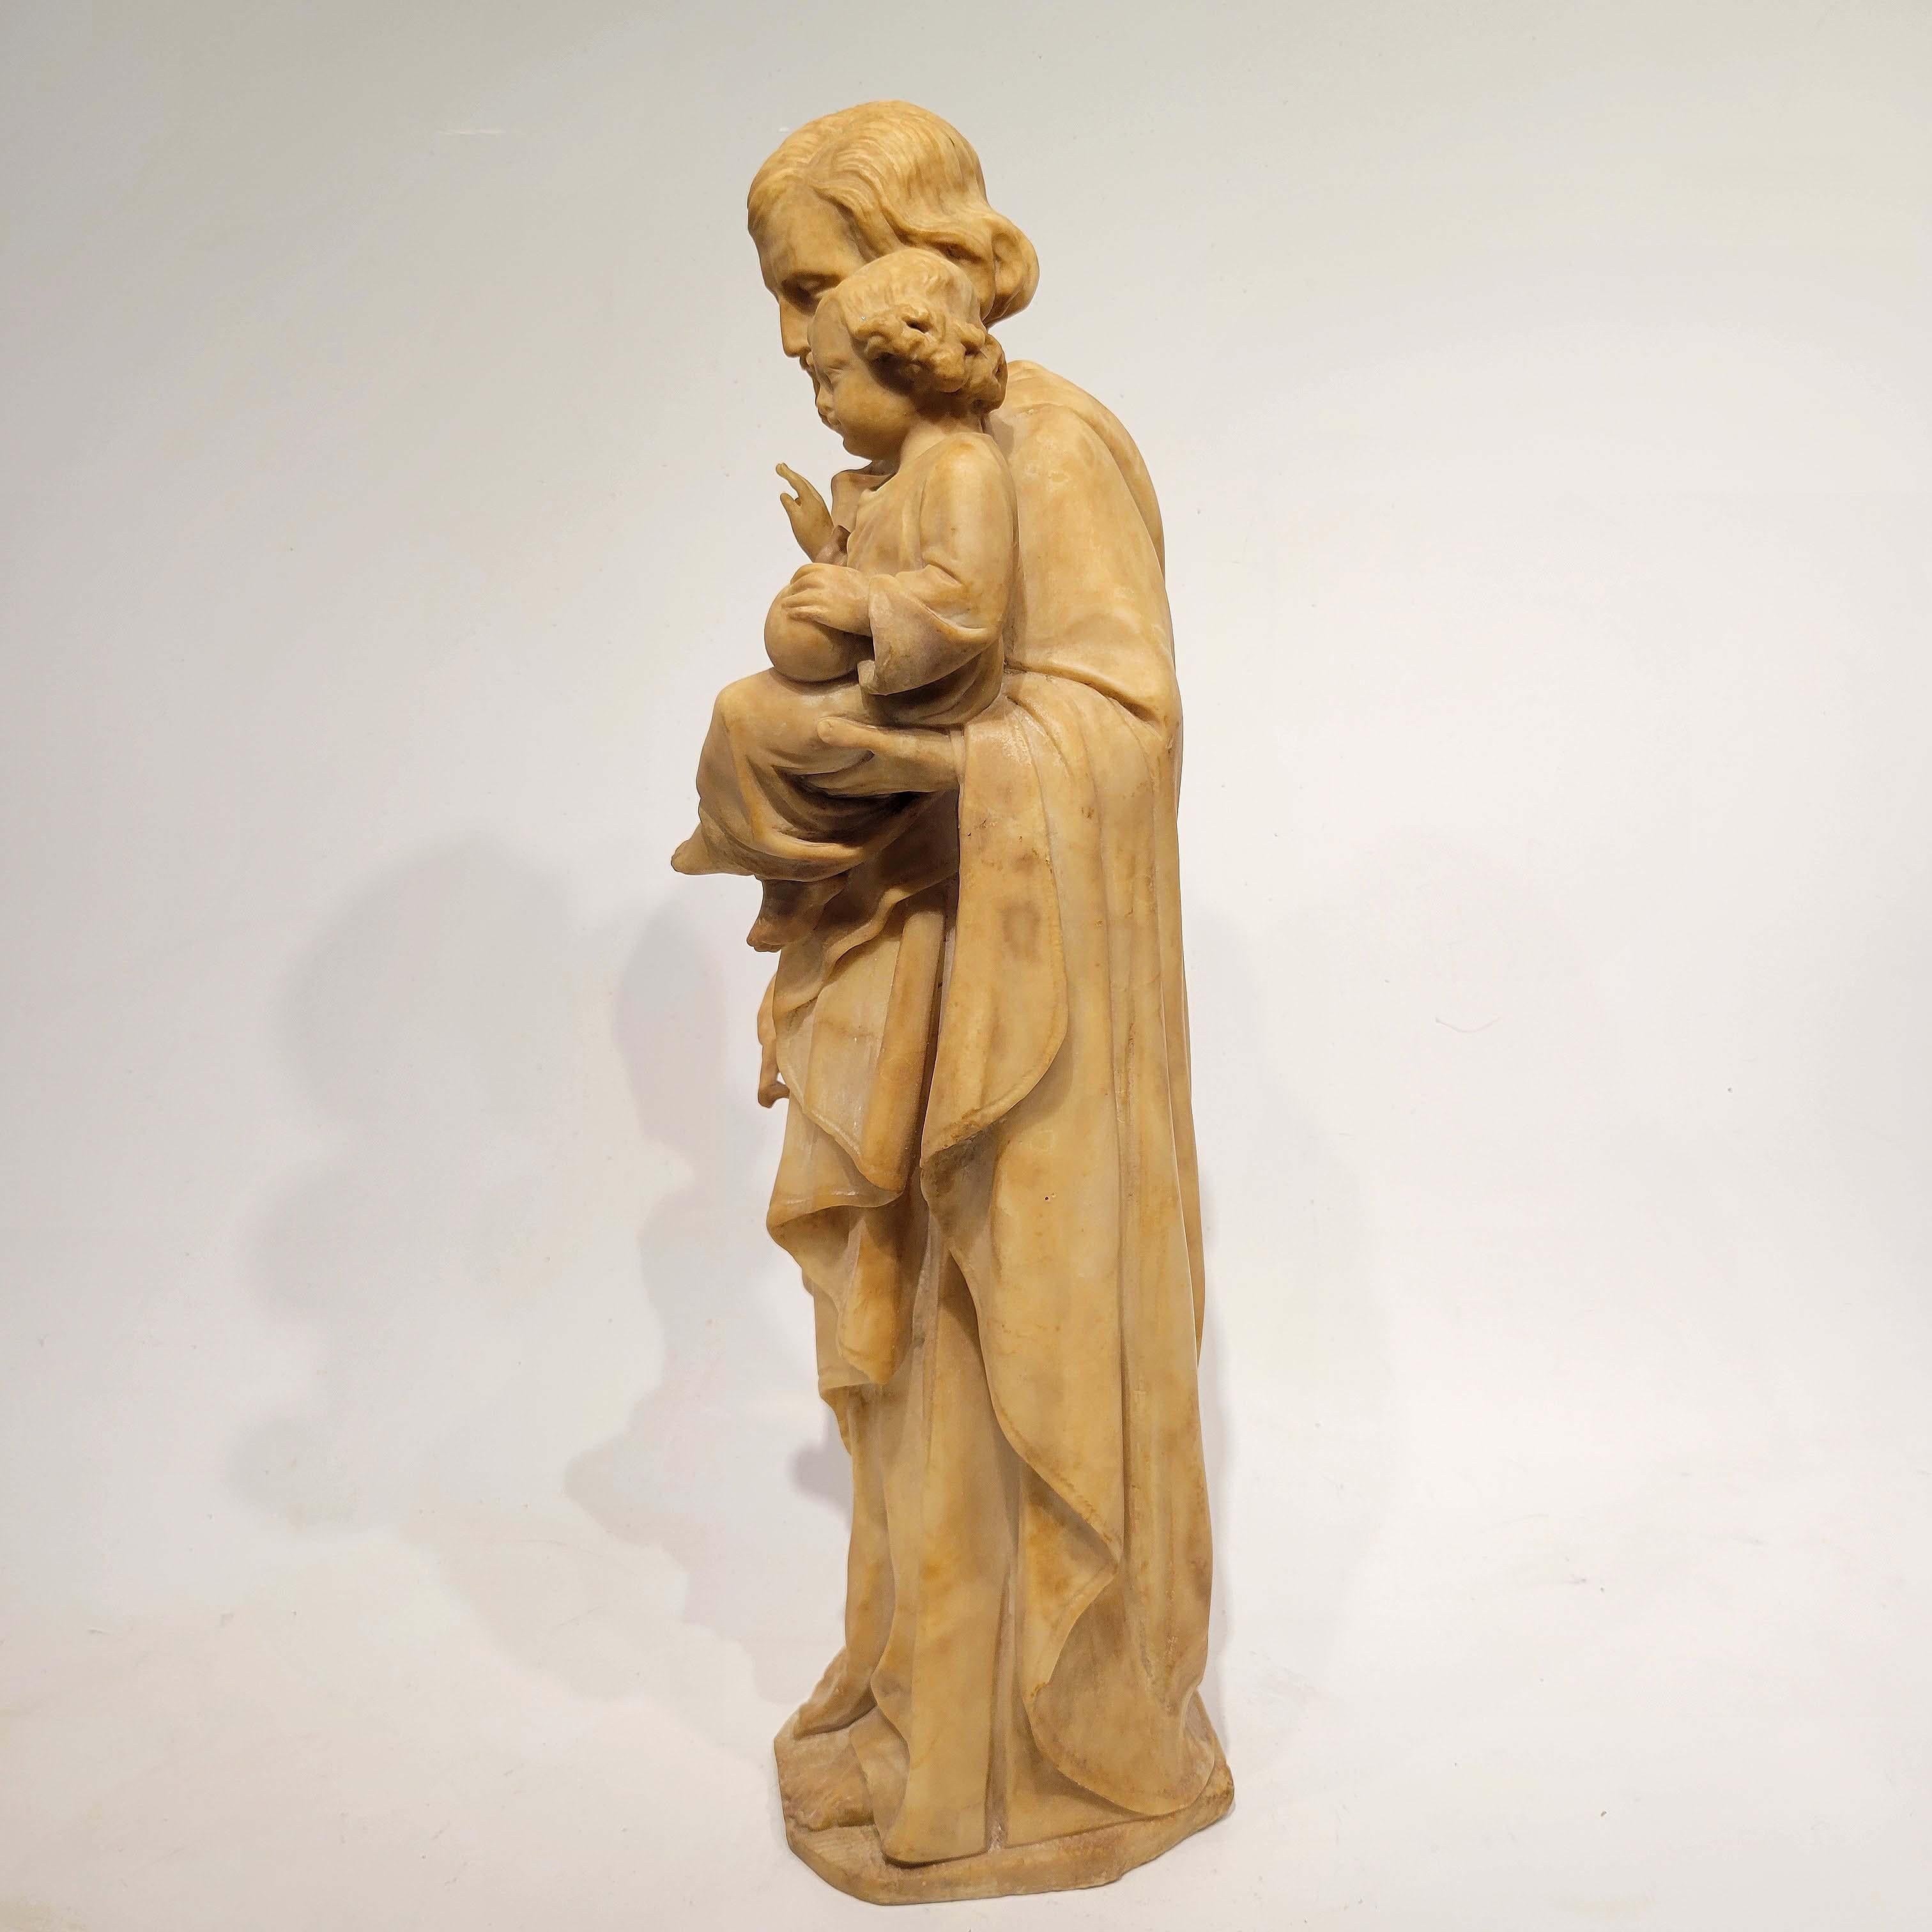 A superb carved alabaster marble of St. Joseph holding Baby Christ in his left arm and holding flowers in his right hand. Great quality carving, circa mid to late 1800s. wonderful quality and in good condition with no flaws. This sculpture was